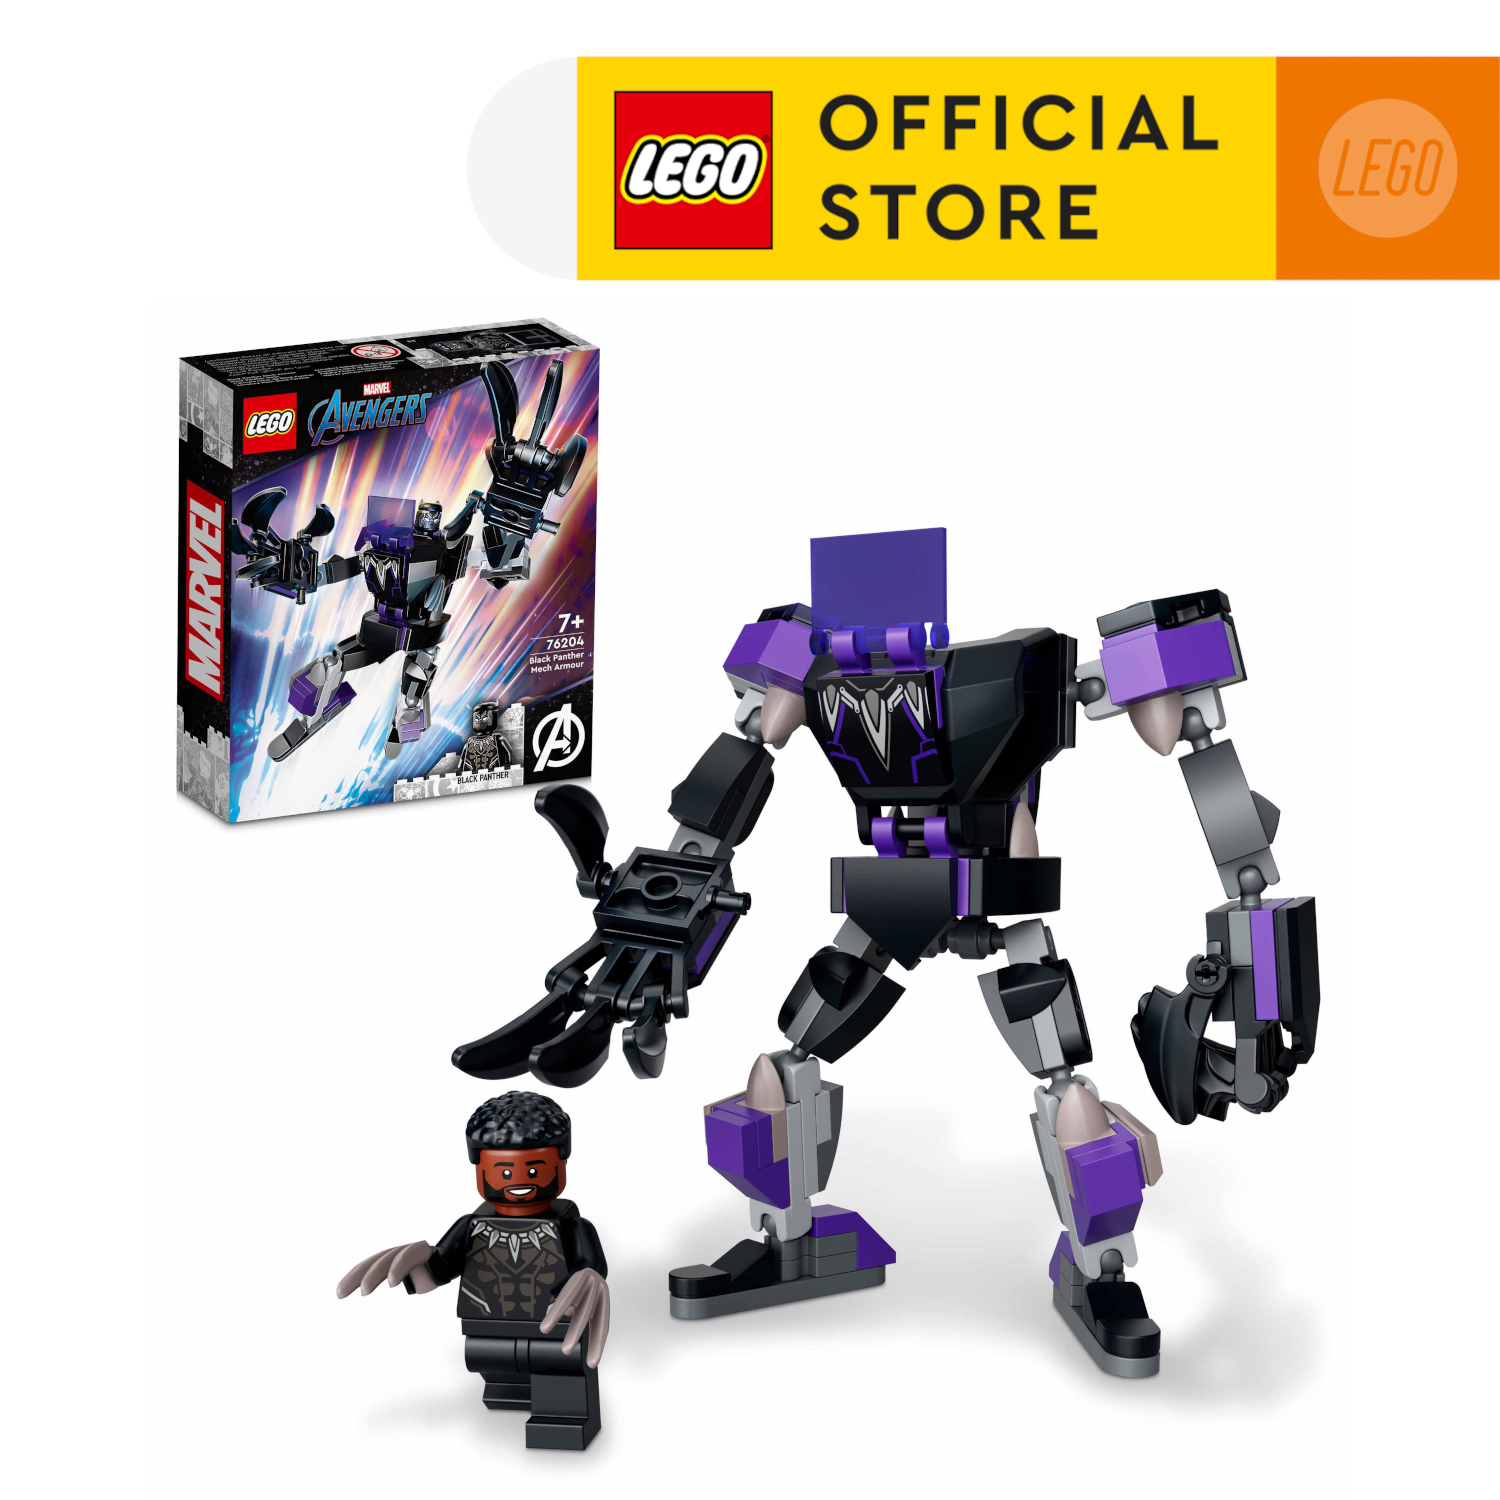 LEGO Super Heroes 76204 Chiến giáp Black Panther (124 chi tiết)